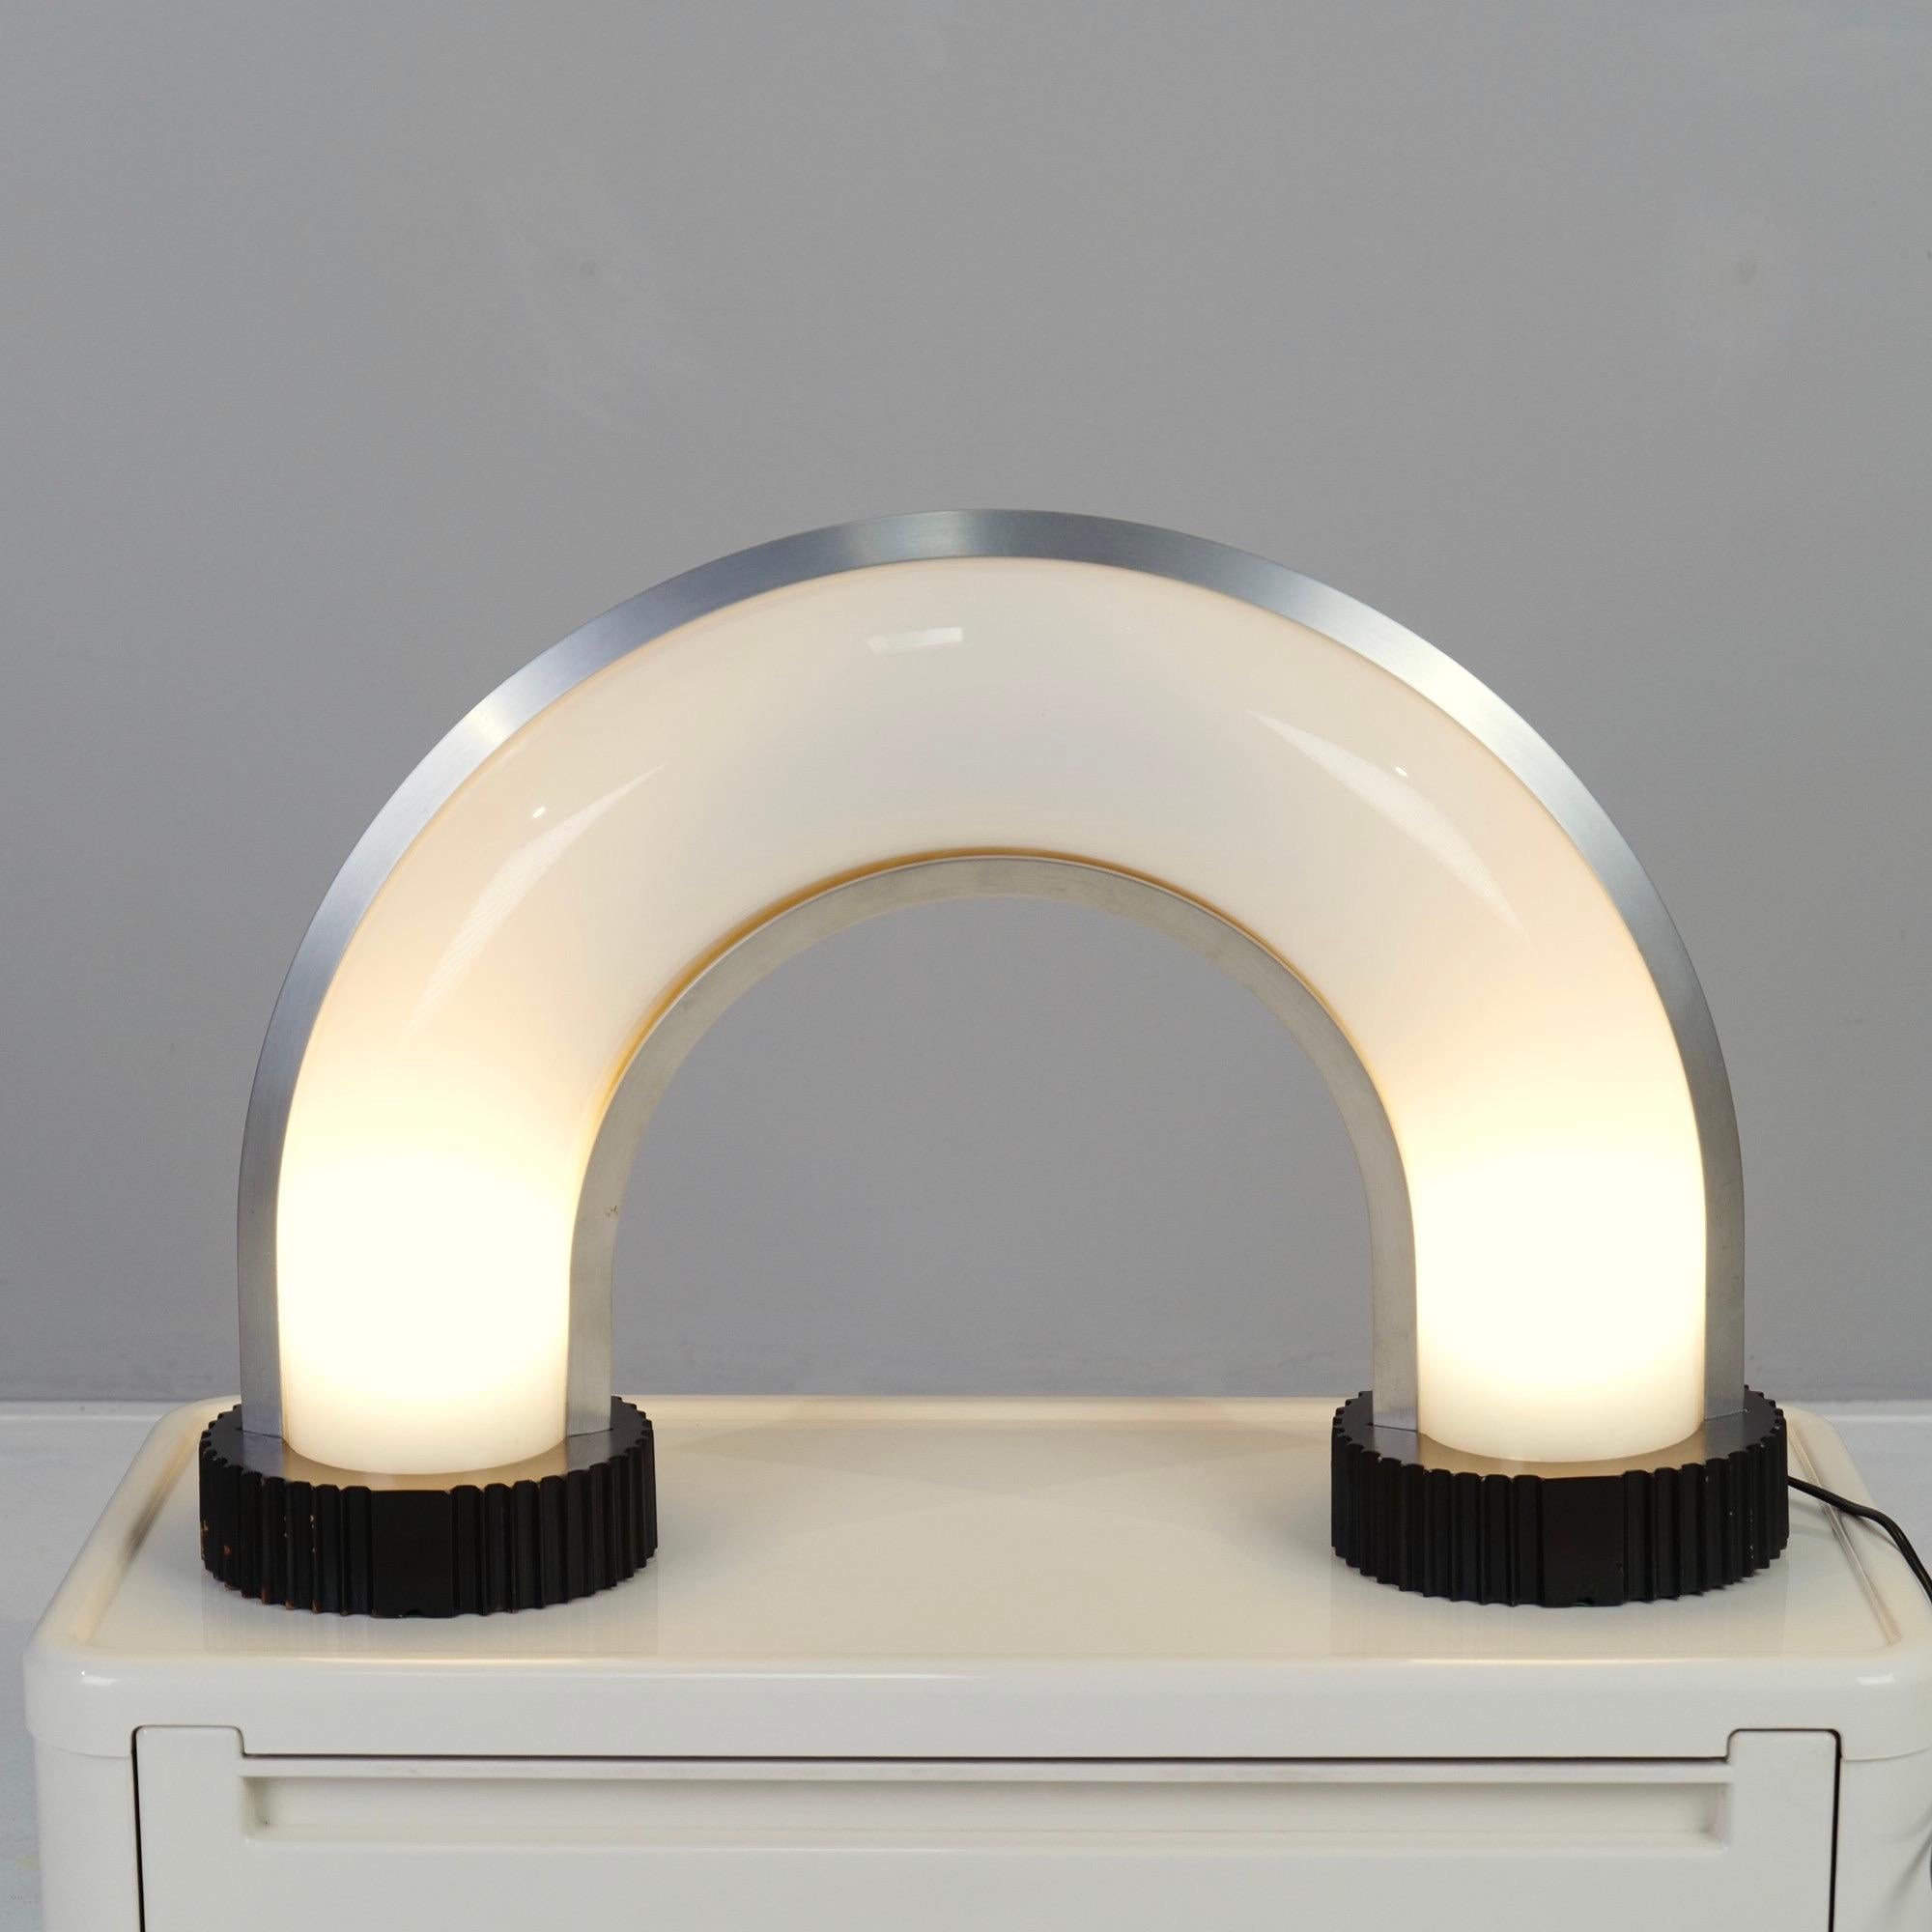 rare space age bow table lamp. 

Italy 1976 - Bieffeplast Design by Adalberto dal Lago & Stefania Giannotti

dimensions:
43 cm height
63 cm width
15 cm depth
material:
metal, opaline acrylic

good condition , signs of use on the painting of the